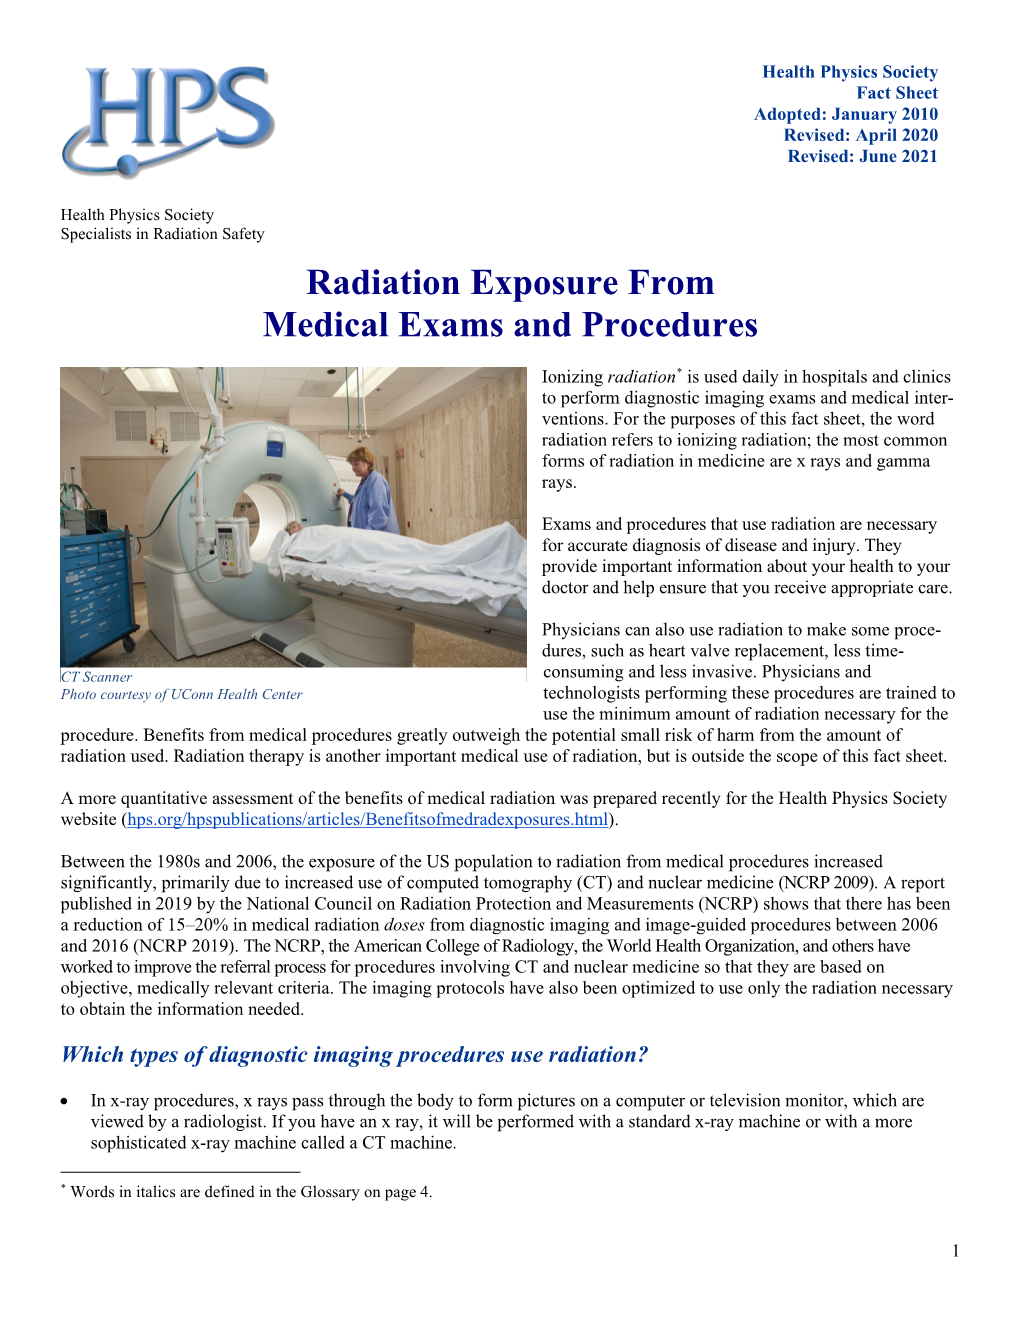 Radiation Exposure from Medical Exams and Procedures